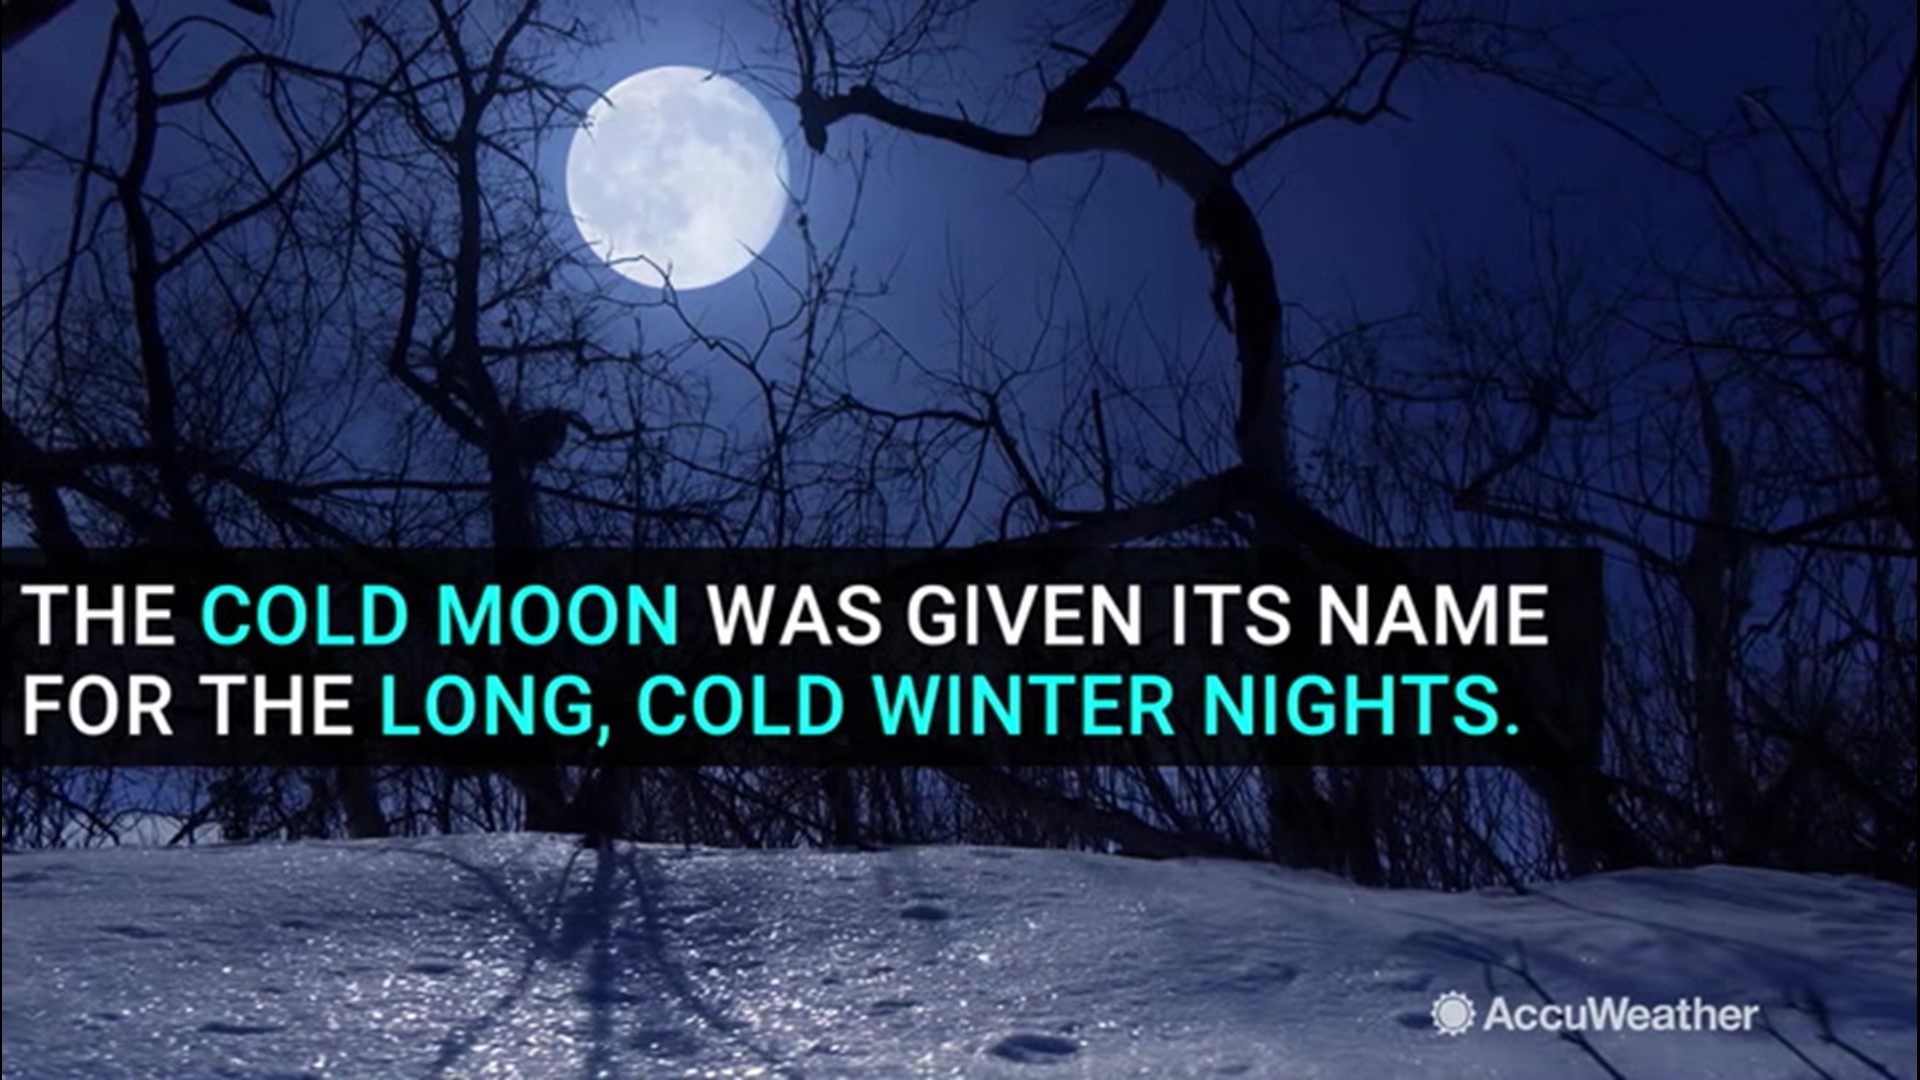 The Cold Moon on Dec. 12 will be the last full moon of the decade. Be sure to bundle up for the cold and catch a glance at the moon on this night.